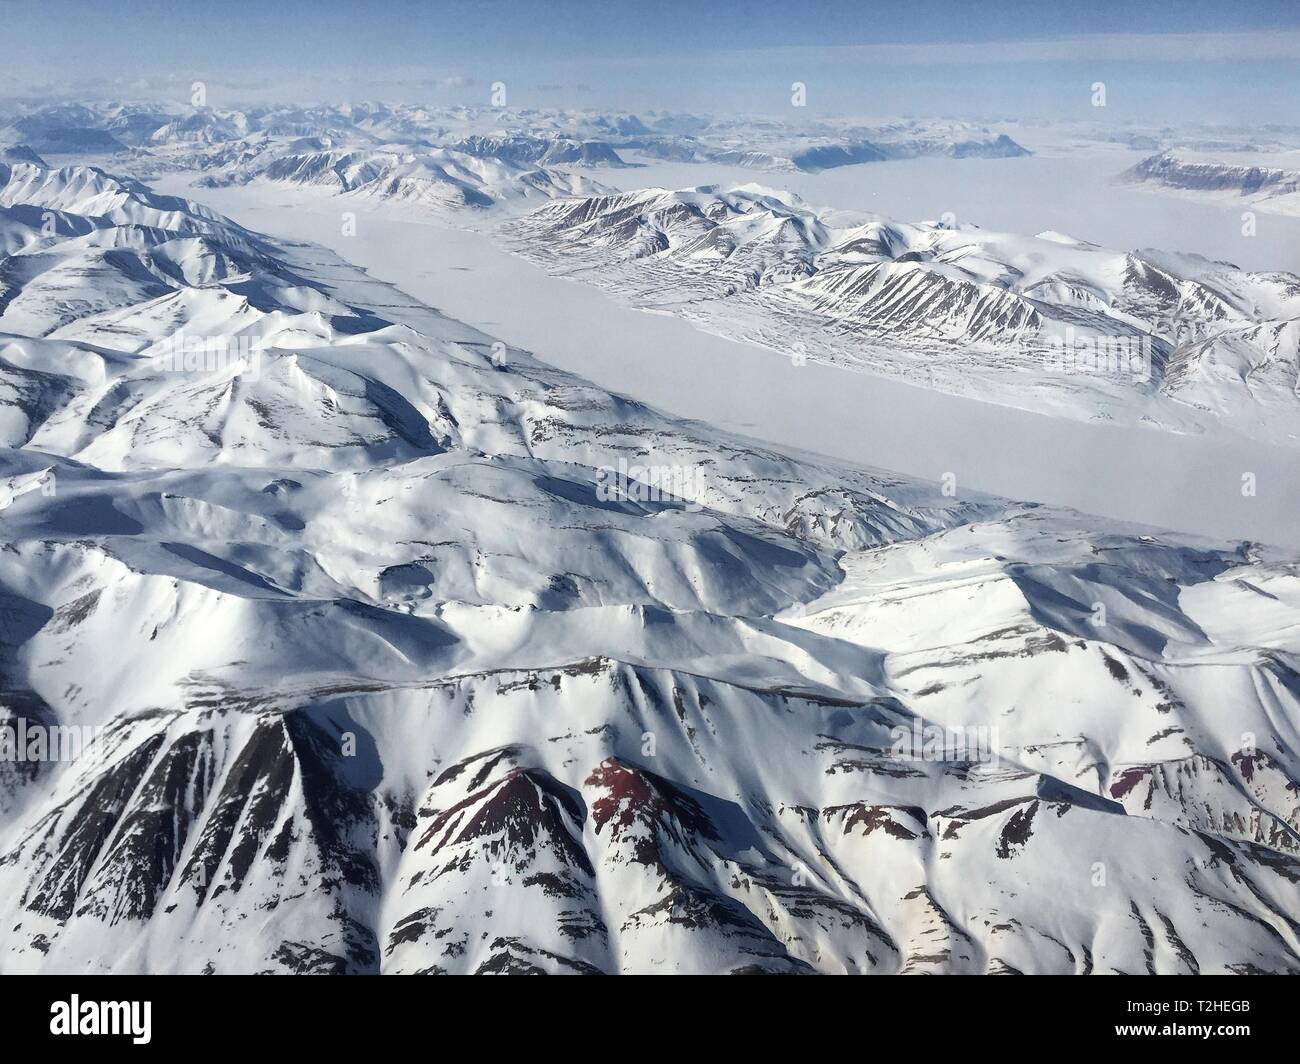 Arctic landscape, snow-covered mountain landscape with glacier, King Christian X Land, Greenland Stock Photo